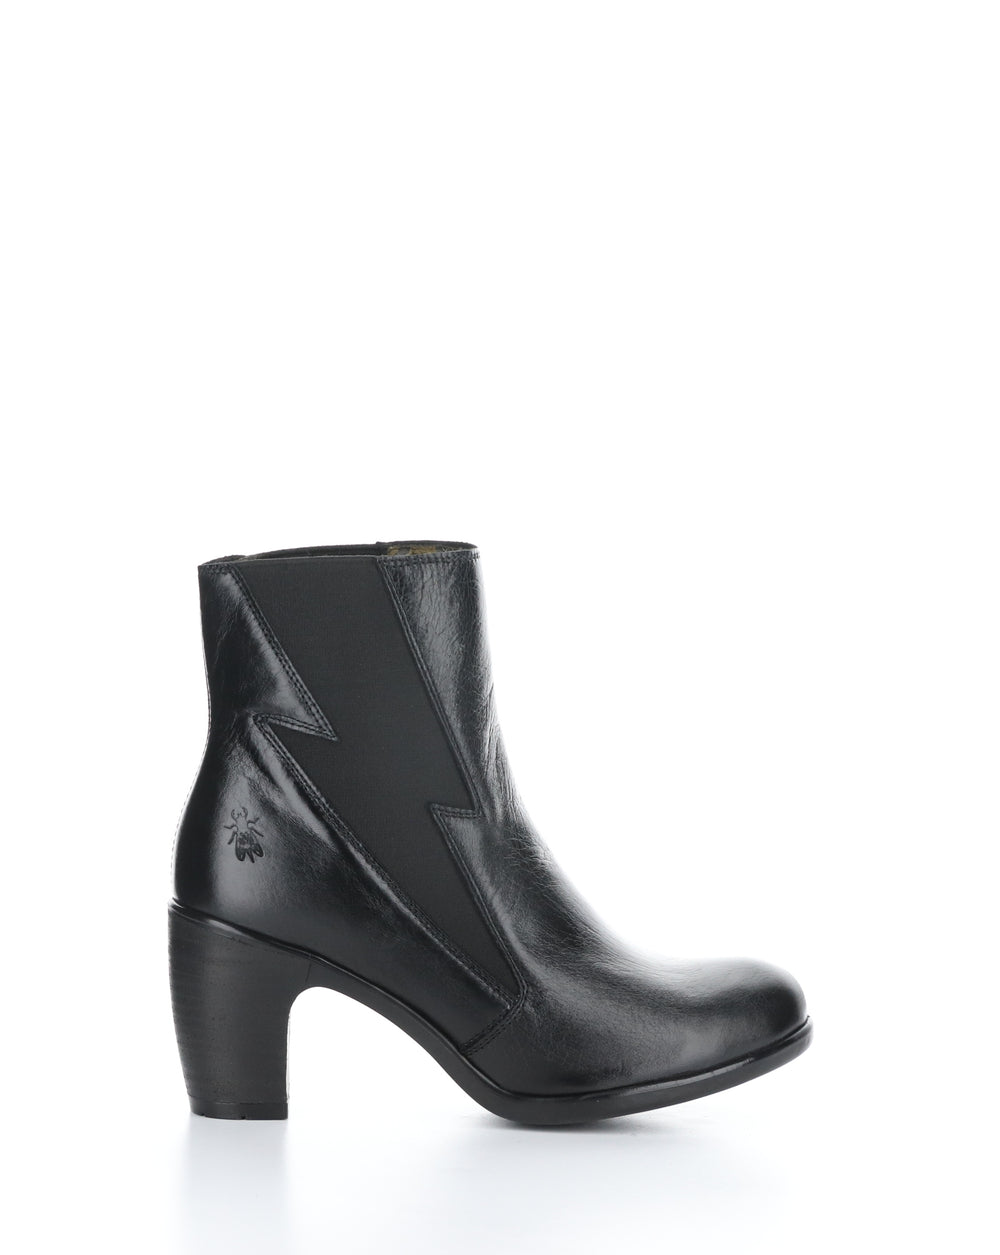 KIMI979FLY 000 BLACK Elasticated Boots